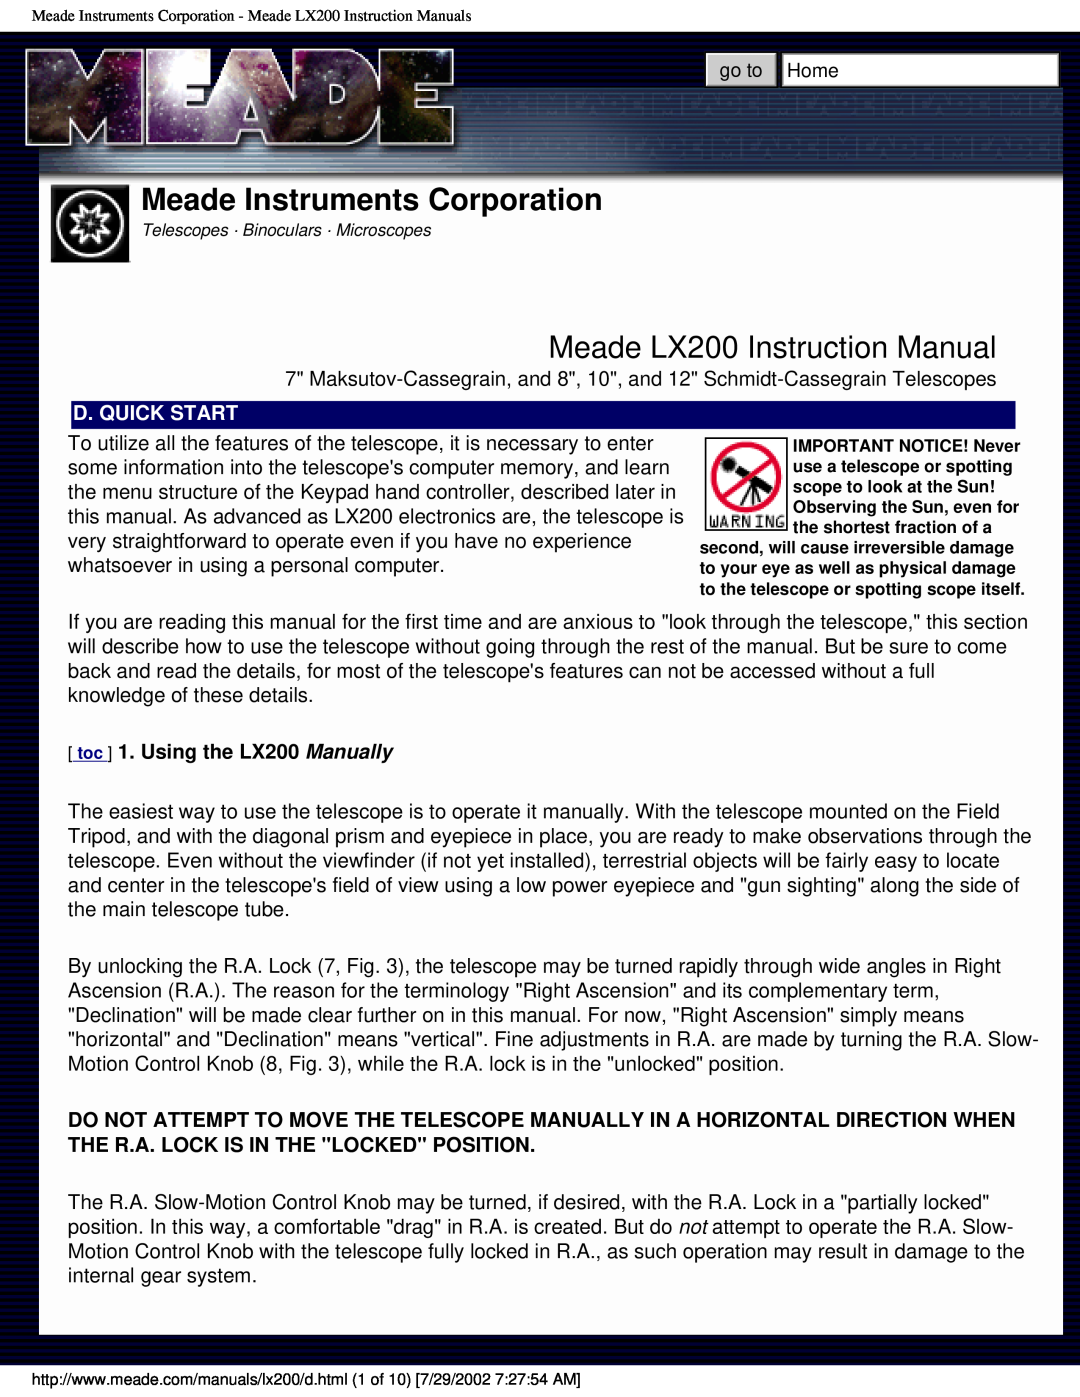 Meade Meade Instruments Corporation, Meade LX200 Instruction Manual, D. Quick Start, toc 1. Using the LX200 Manually 